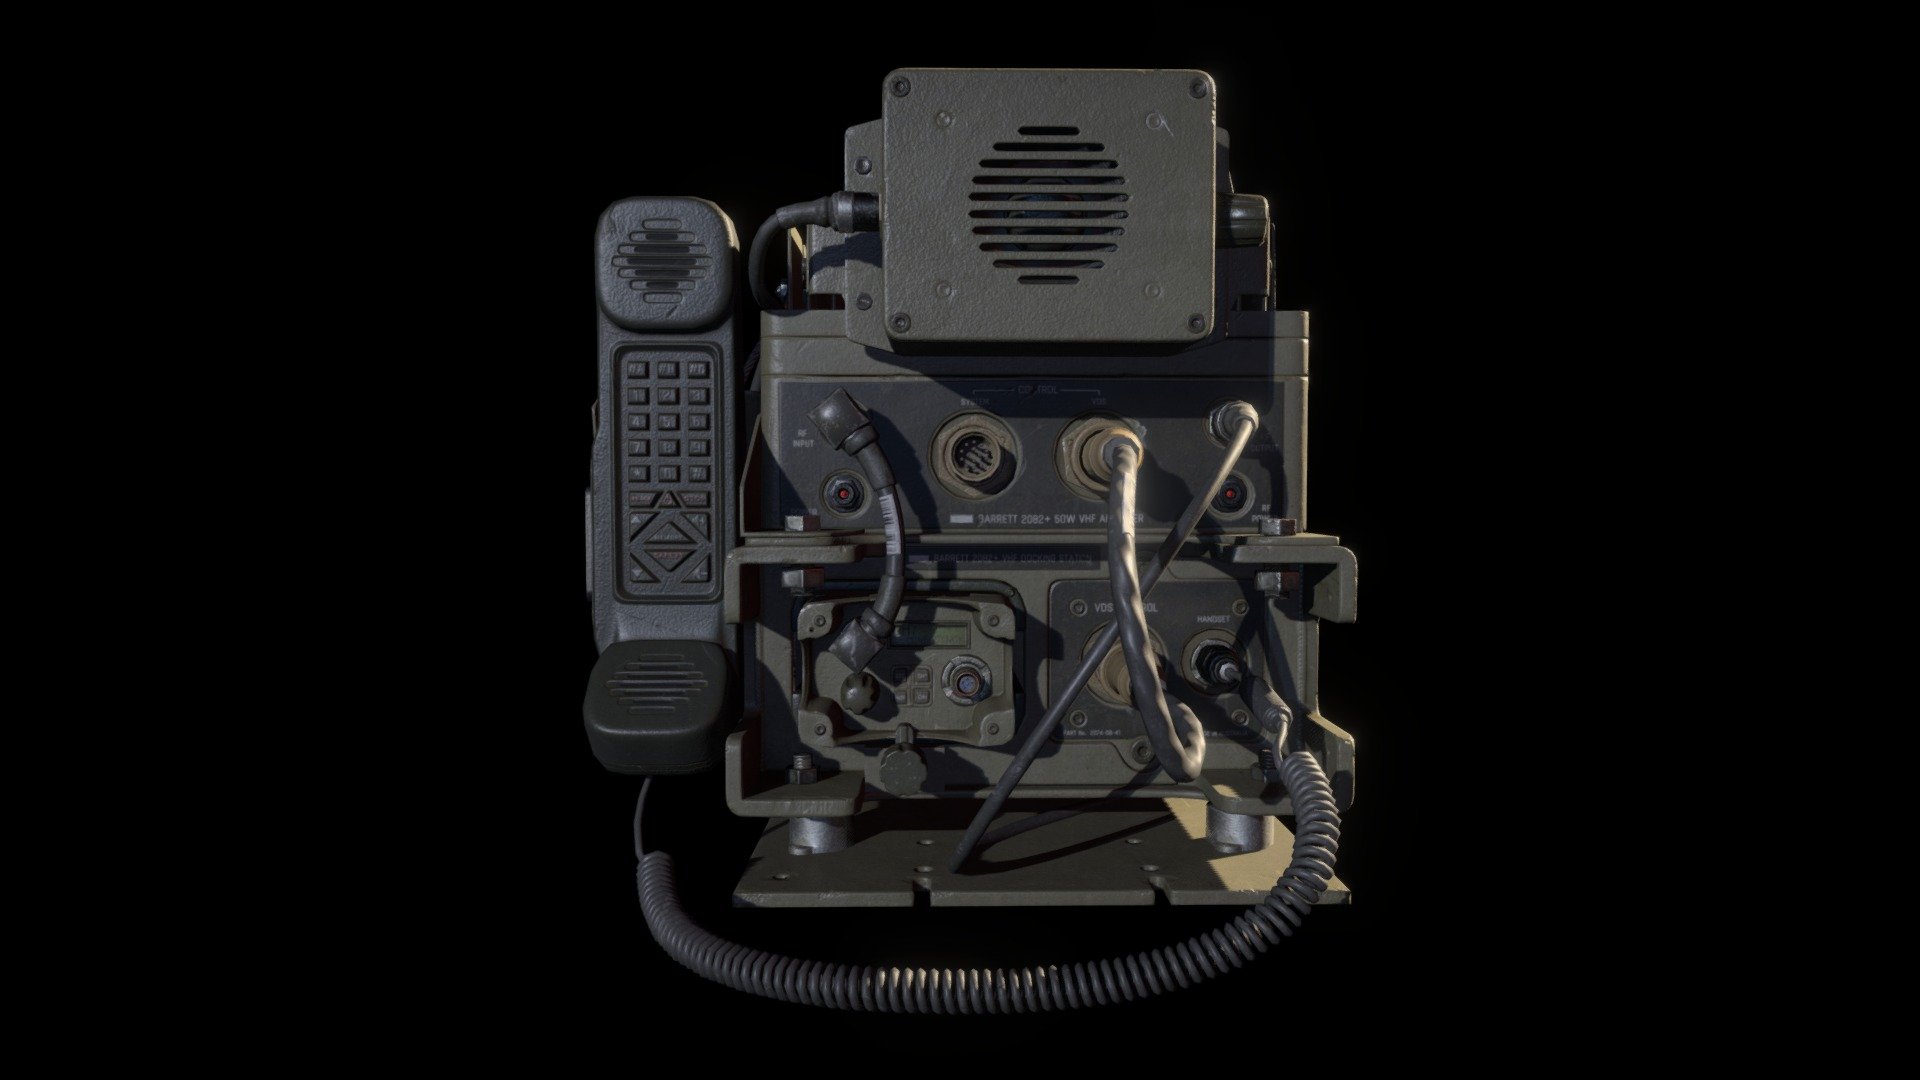 I had heard so many good things about new Blender 2.8 That I wanted to try it myself.
I had choosen to create this radiostation, because it's complex enough to try few techniques, and simple enough that i could actually complete it.
Whole model is 23k tris and uses 4K textures.

More renders here: https://www.artstation.com/muszka_pietruszka - Barrett PRC-2082 Radiostation - 3D model by muszka_pietruszka 3d model